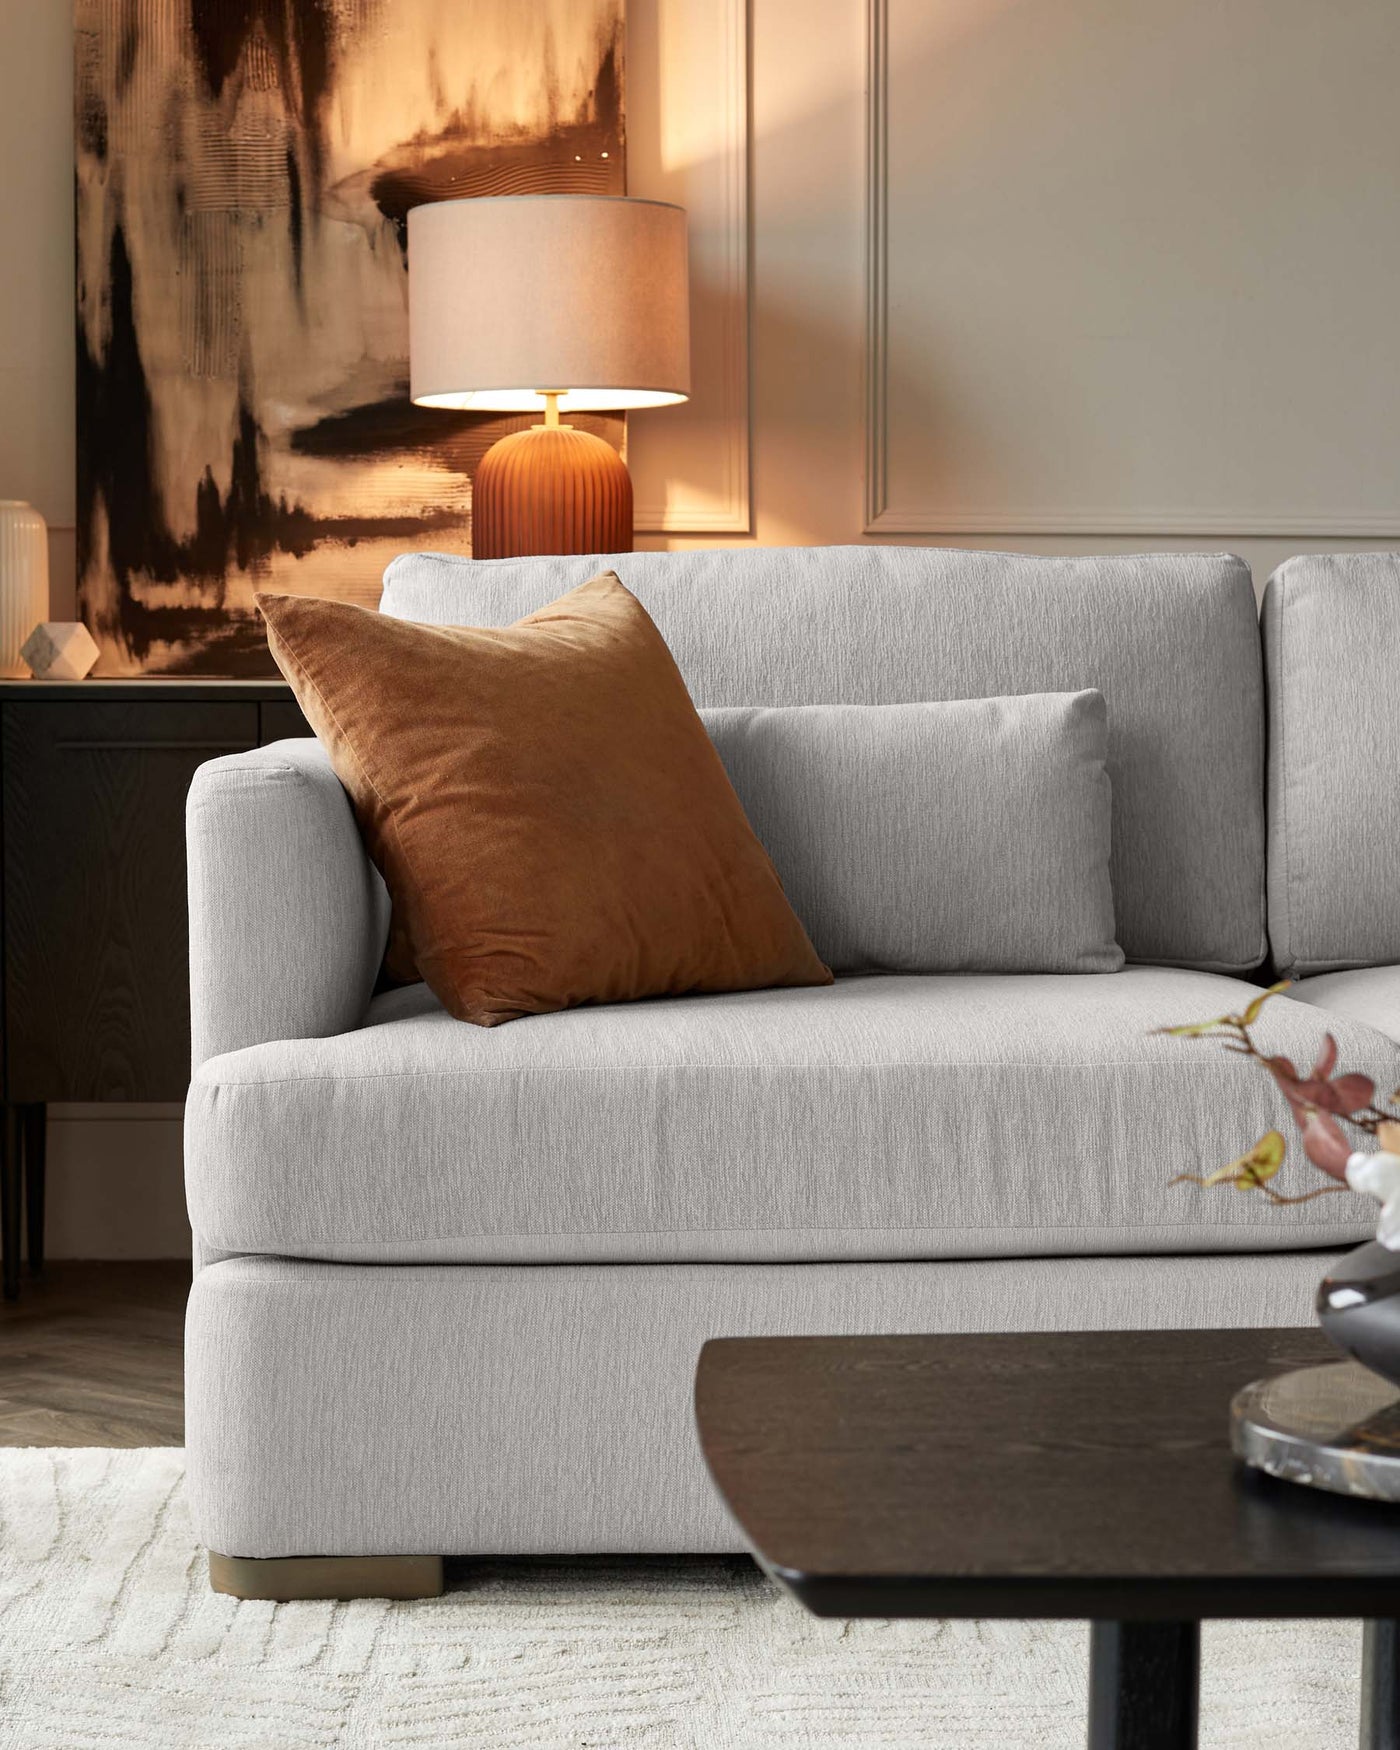 A modern light grey fabric sofa with plush cushions, accented with a burnt-orange throw pillow, alongside a dark brown wooden coffee table with an organic shape. A beige lamp with a cylindrical shade is visible behind the couch. The setup is complemented by a textured off-white area rug beneath.